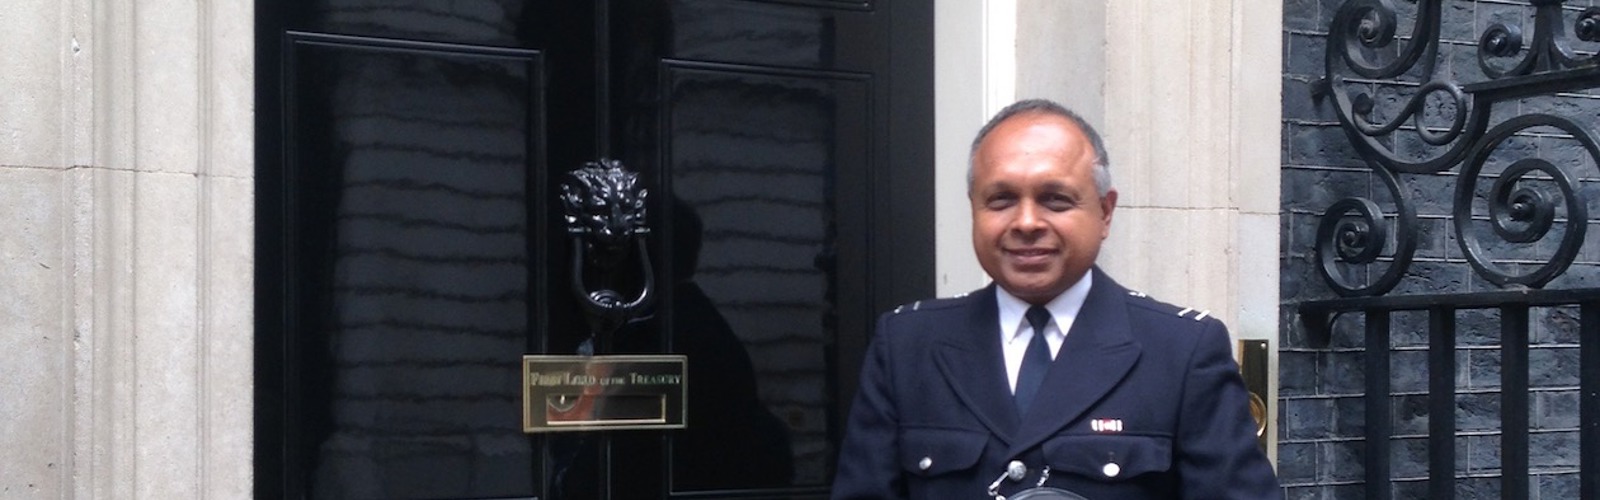 Olson Oxenham, EHP and Special Inspector, outside 10 Downing Street